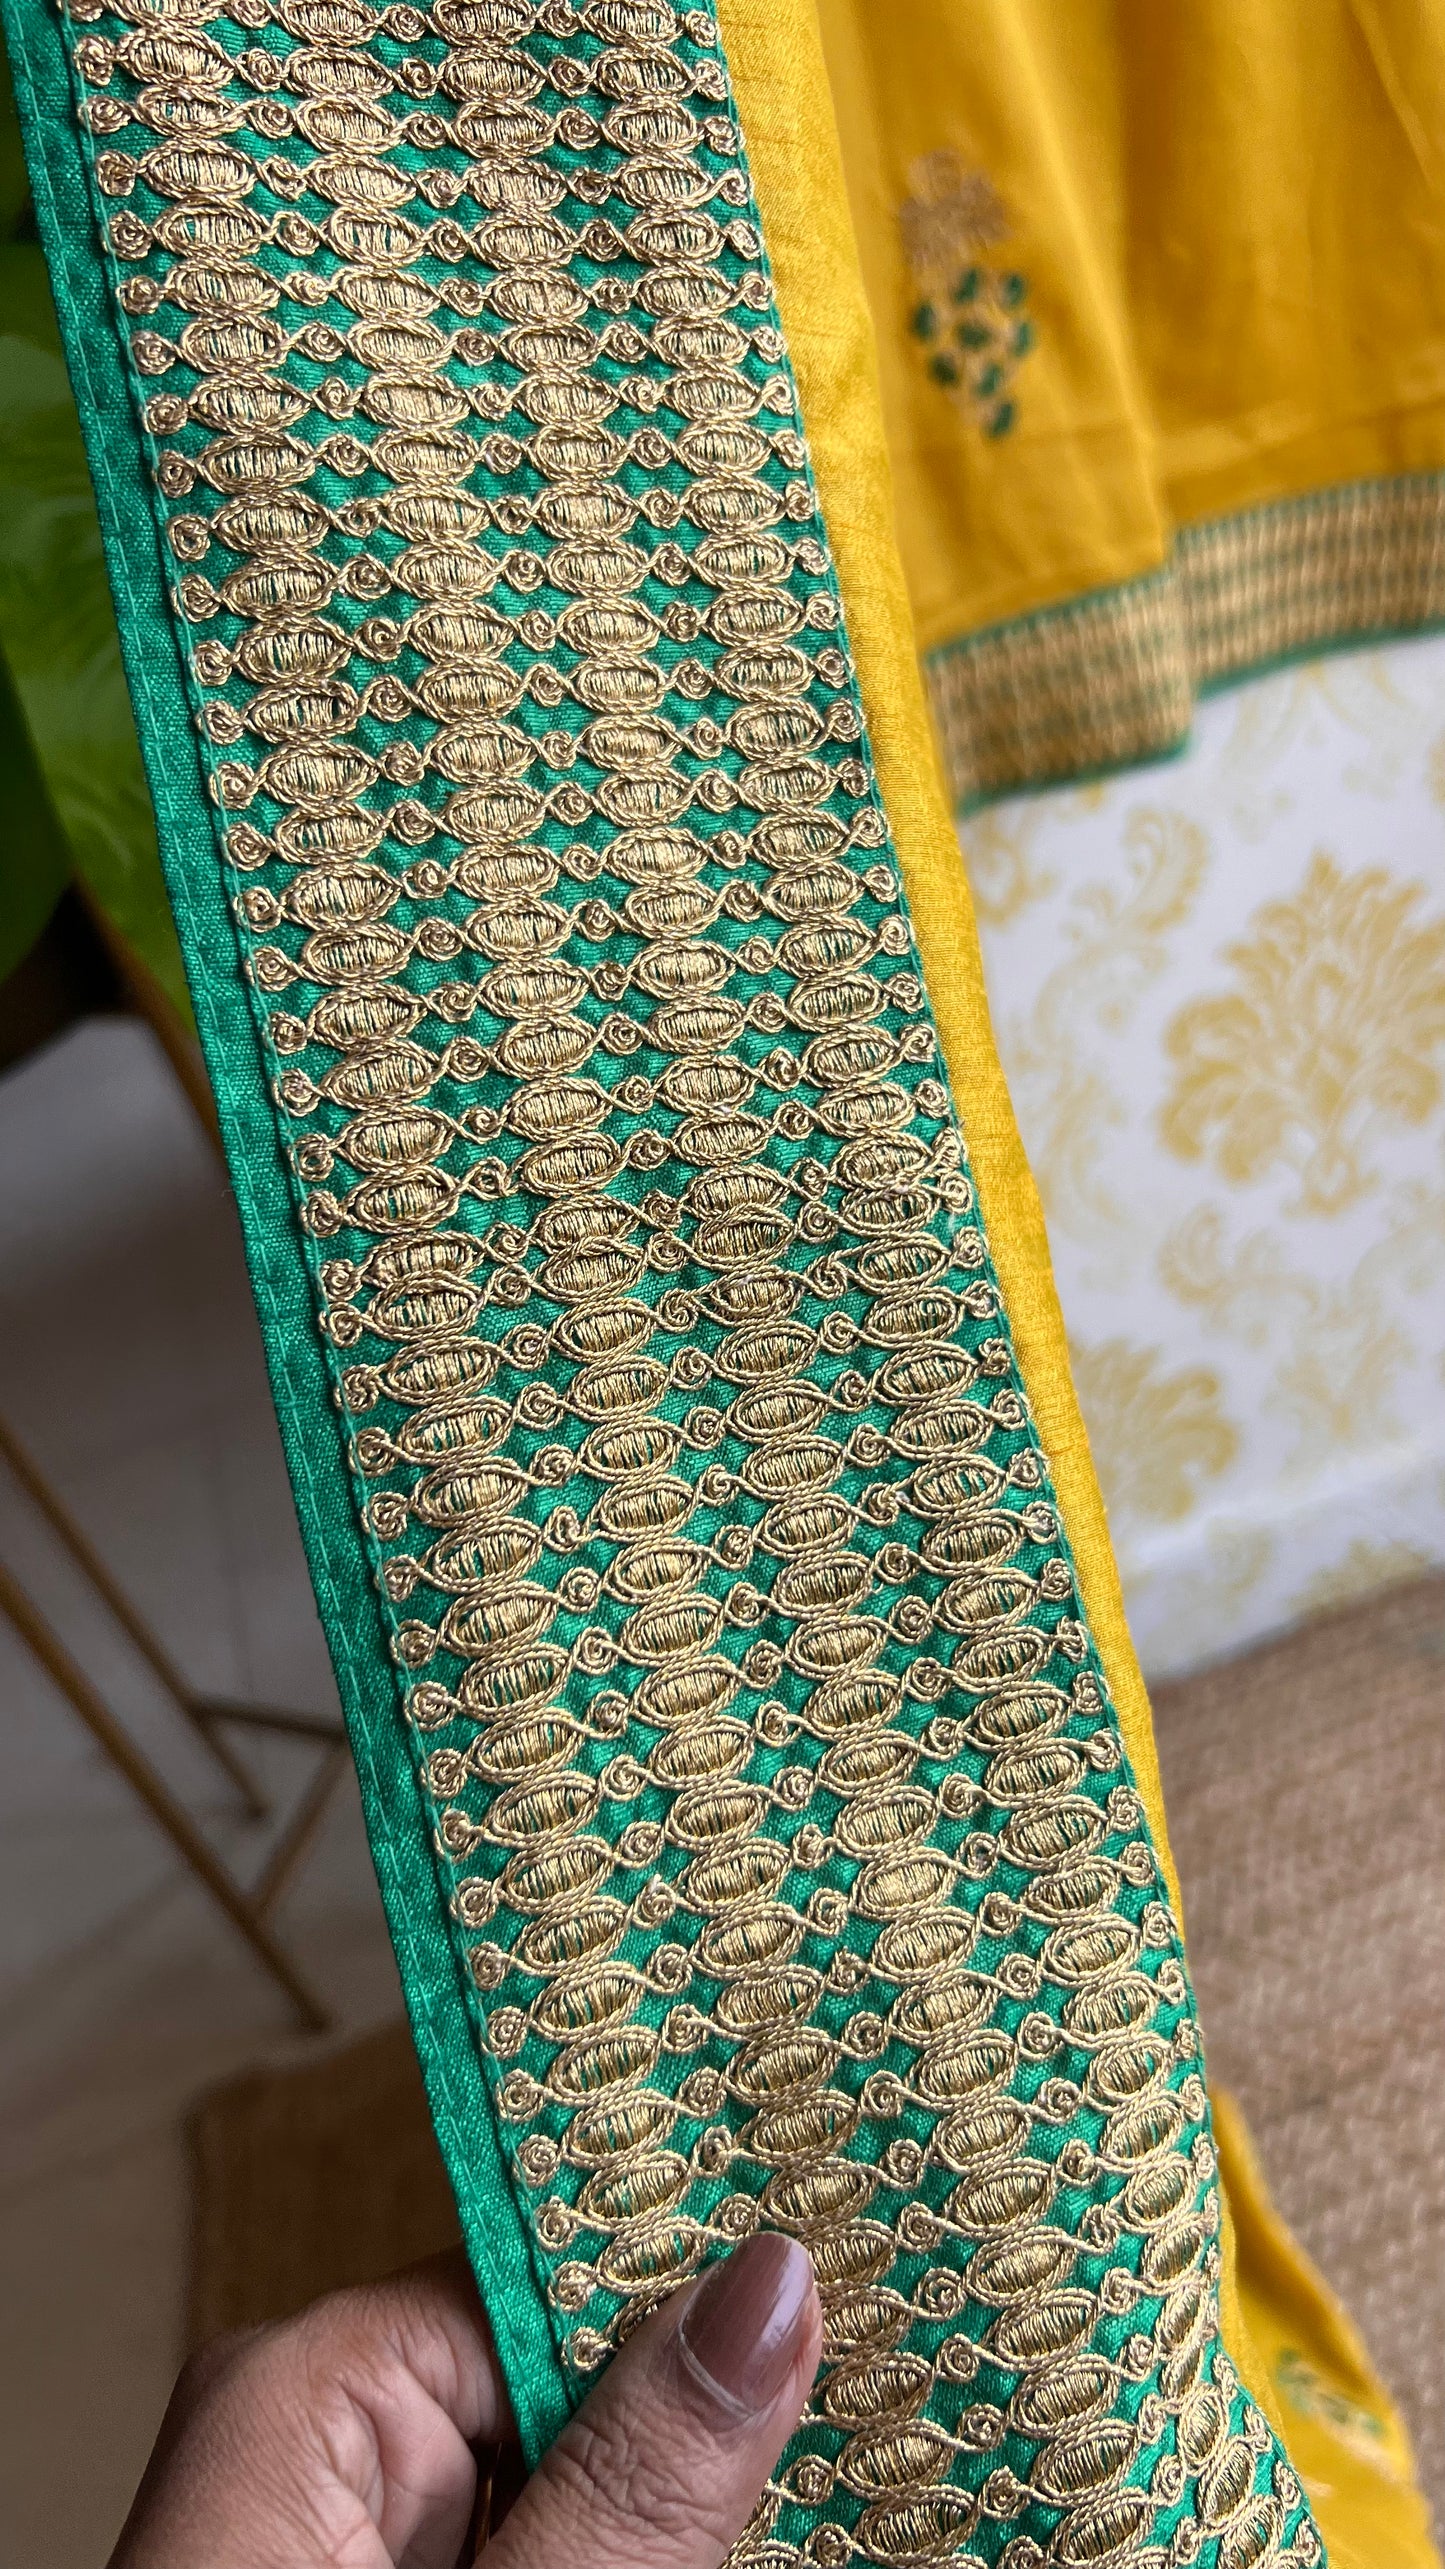 Yellow Malai Silk saree with embroidery blouse - Threads